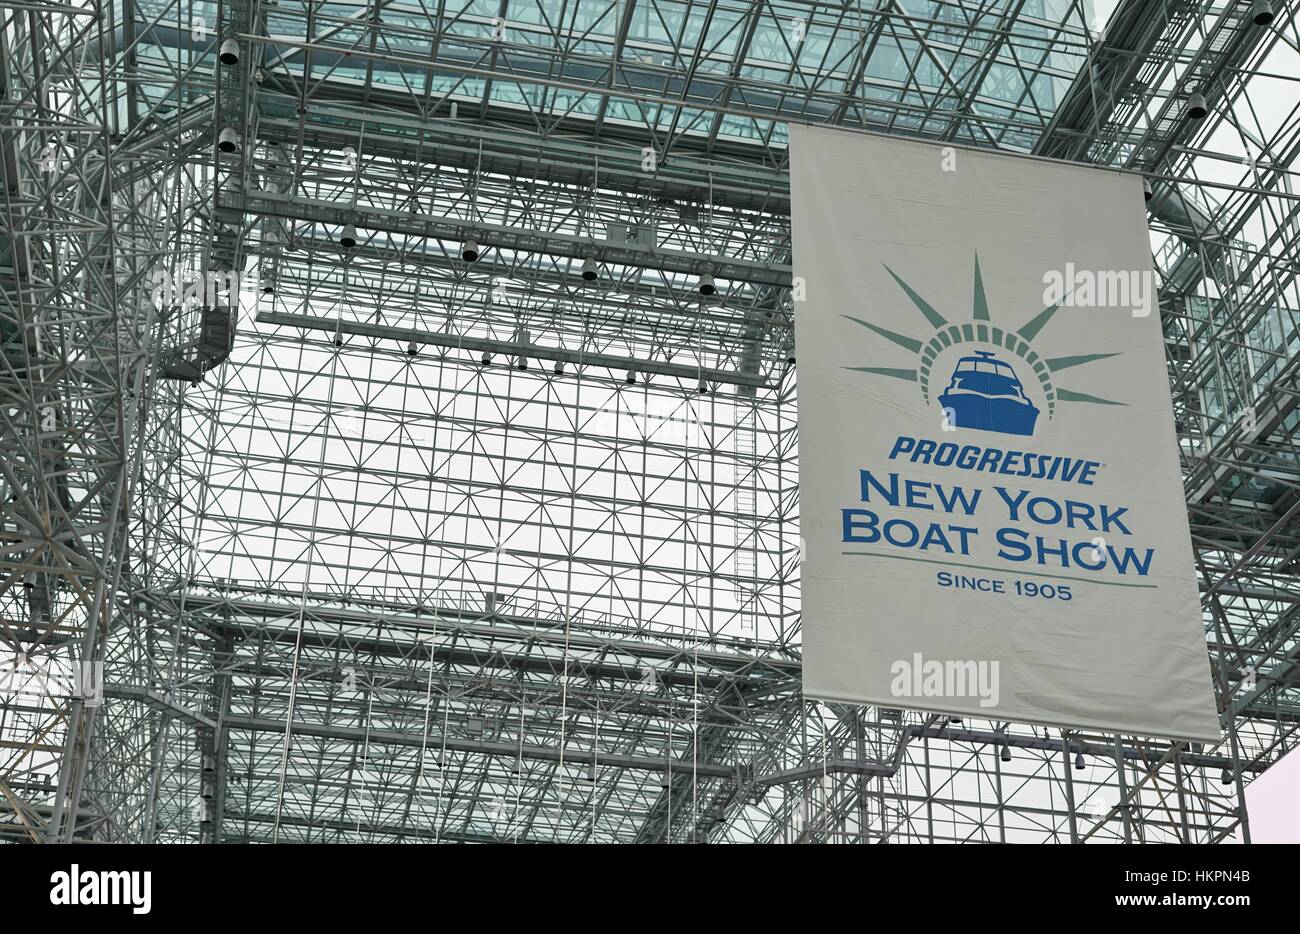 The Progressive New York Boat Show took place at the Jacob K. Javits Convention Center in New York January 25-29, 2017 Stock Photo